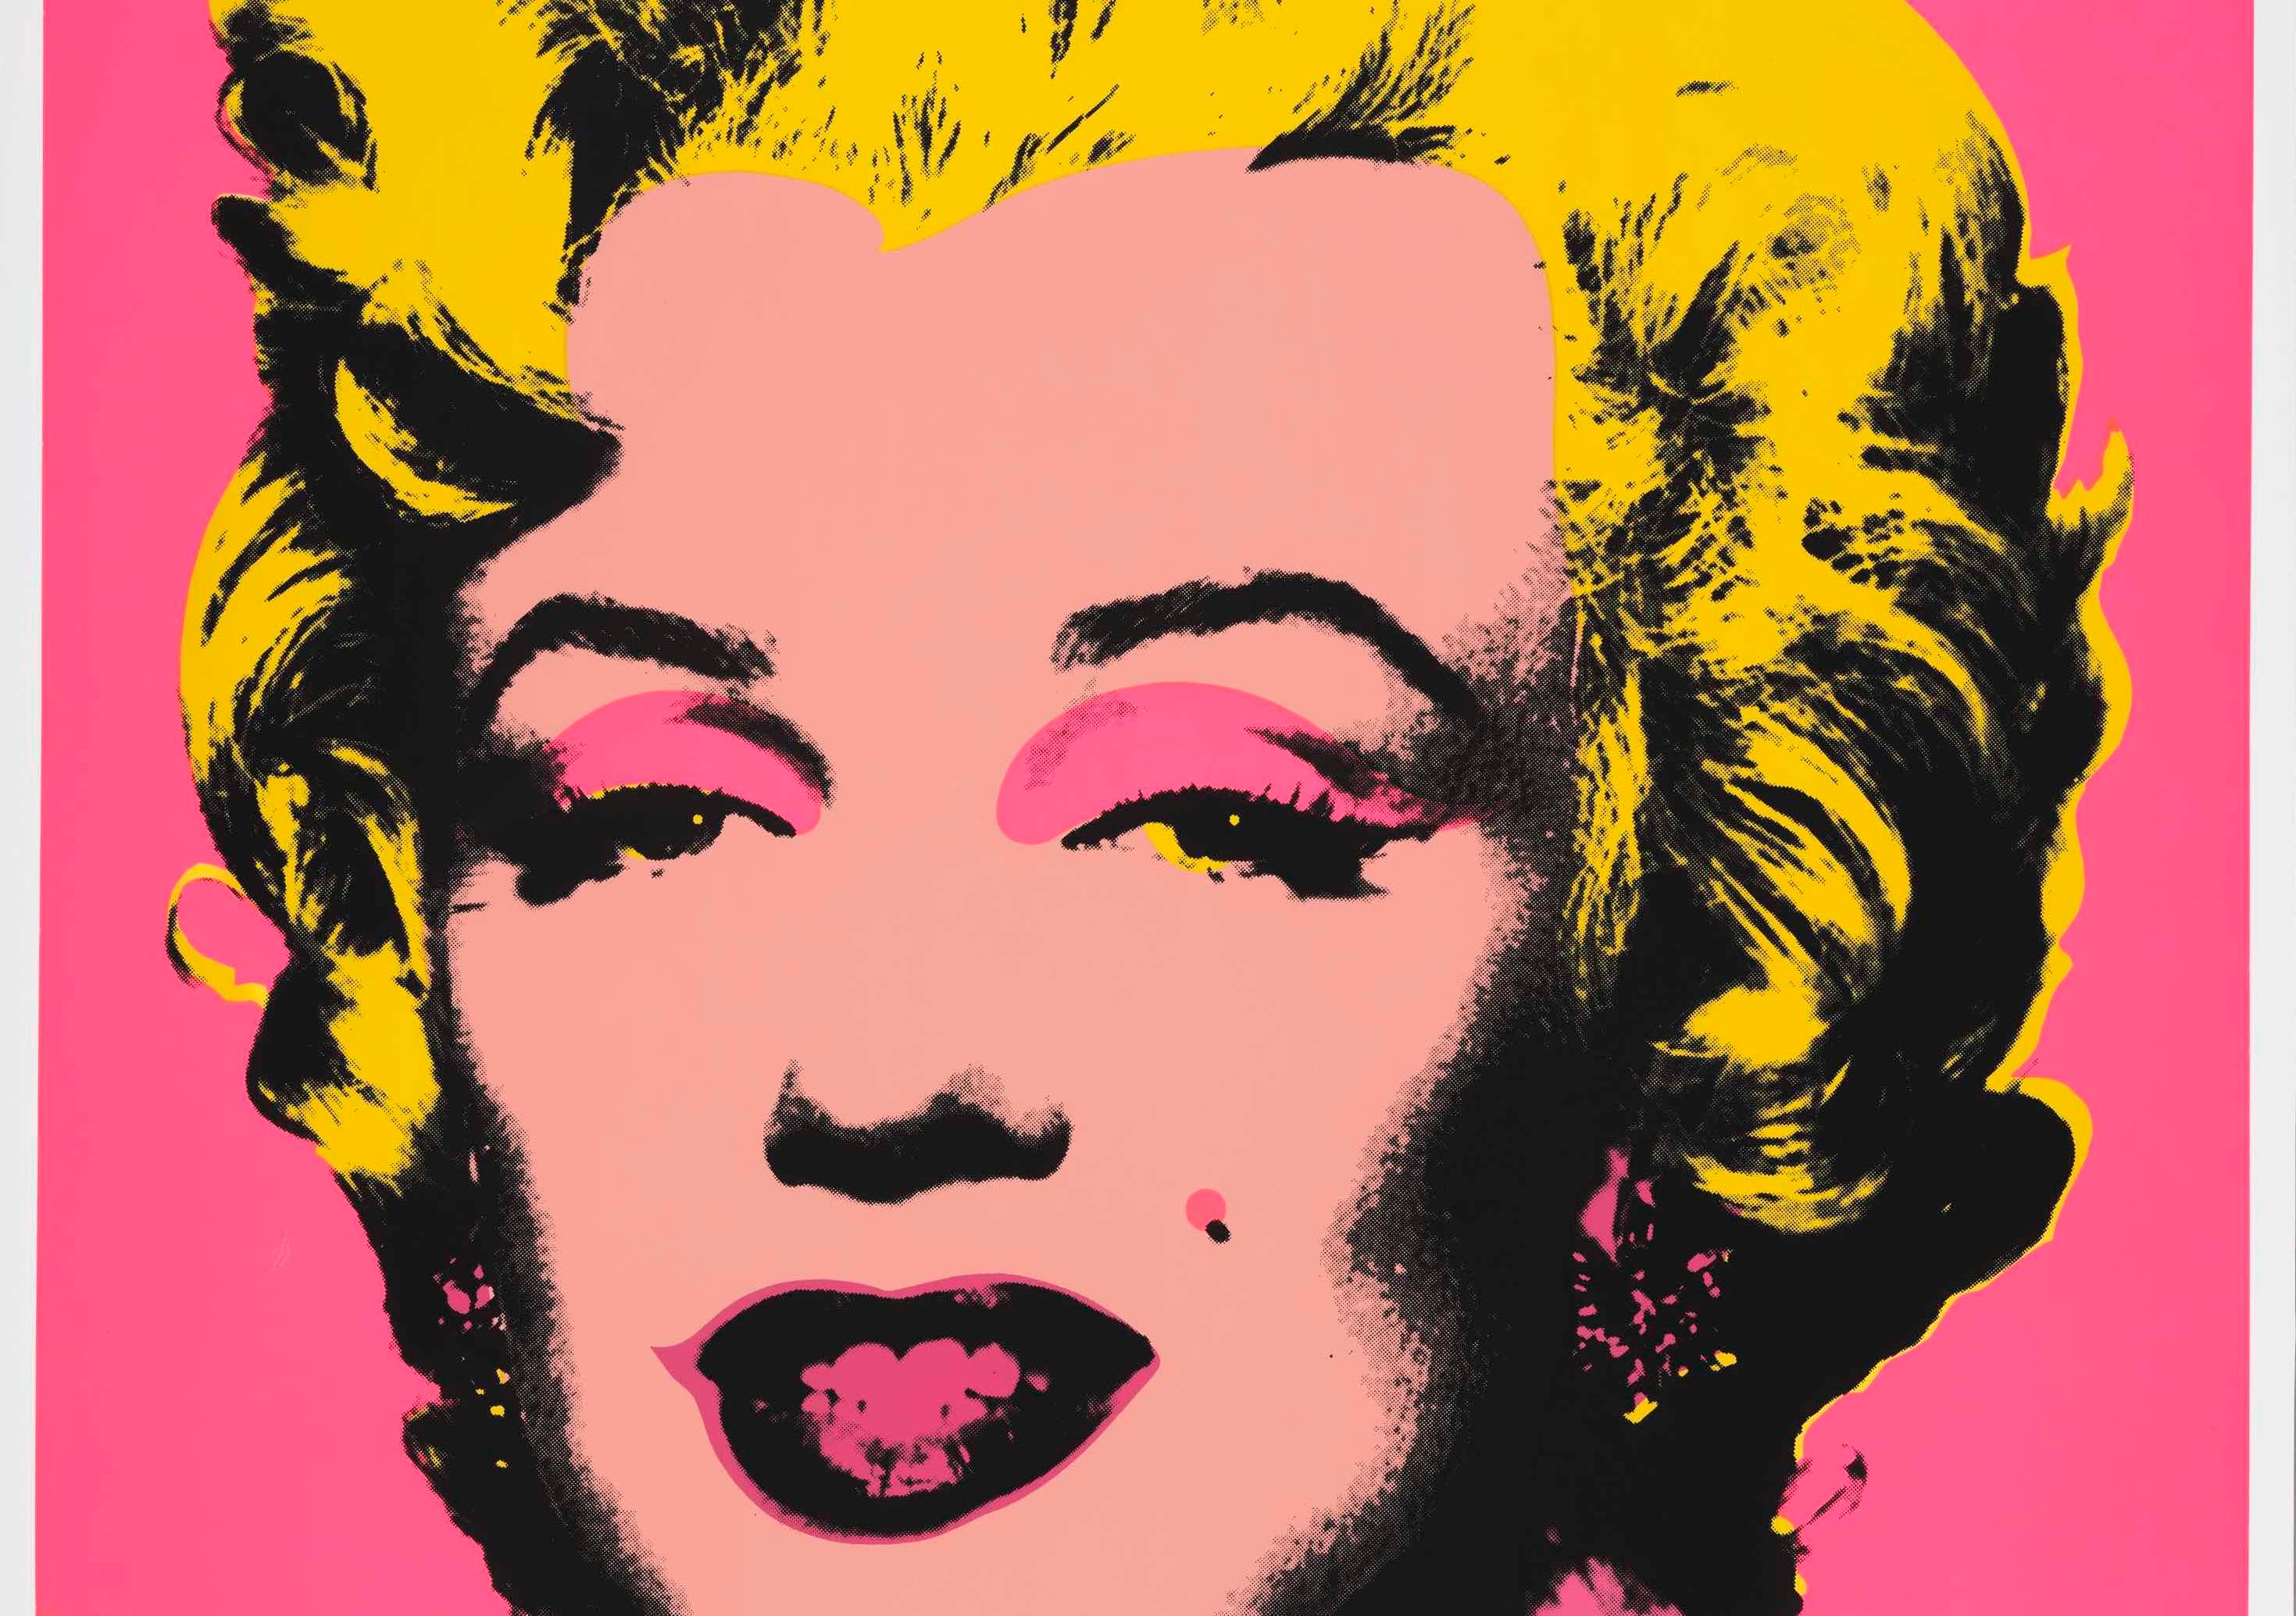 Andy Warhol's Marilyn will feature